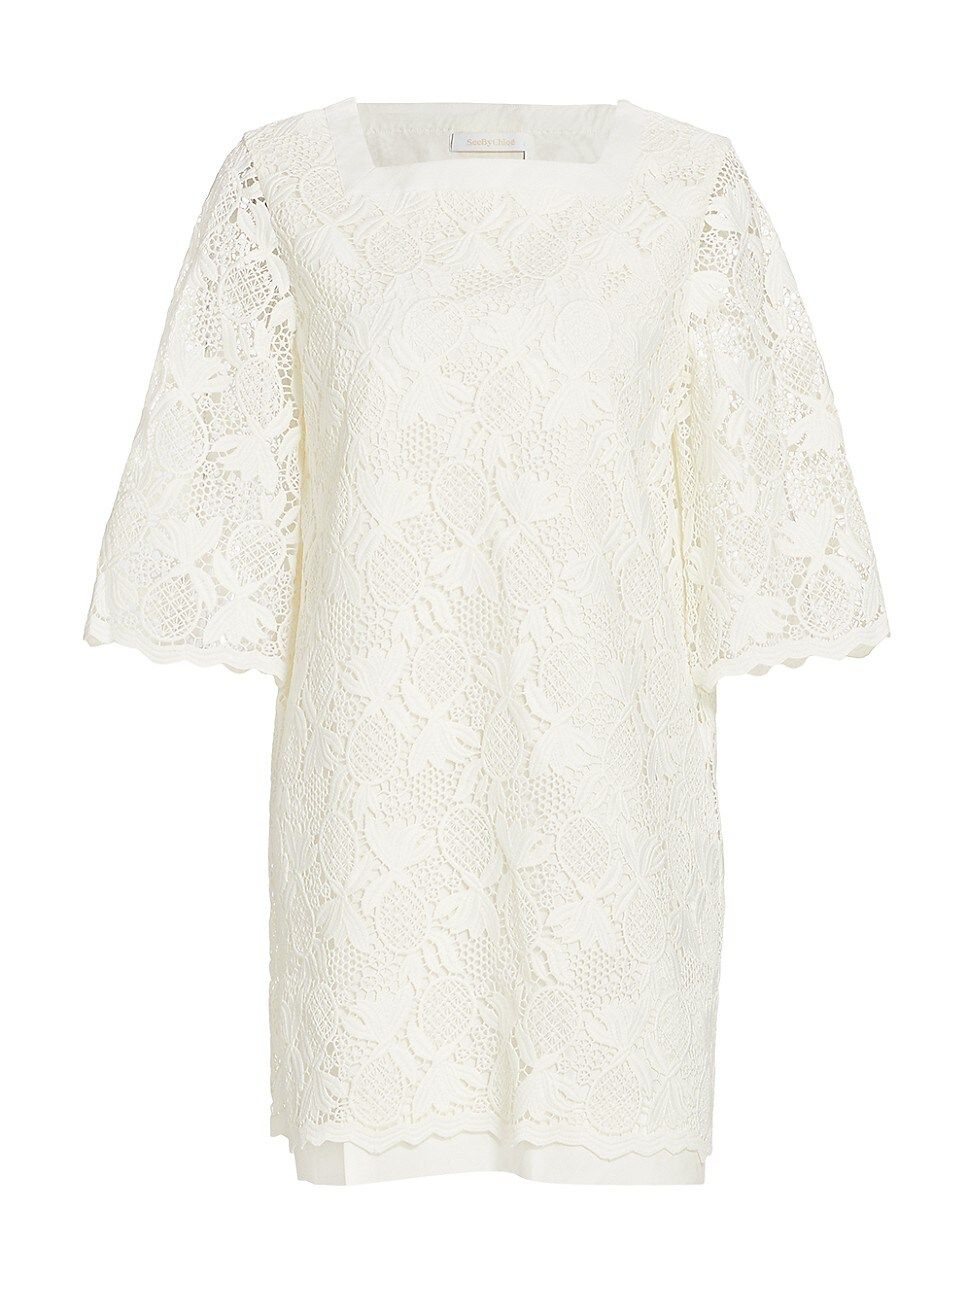 See by Chloé Women's Pineapple Lace Dress - Pristine White - Size 6 | Saks Fifth Avenue